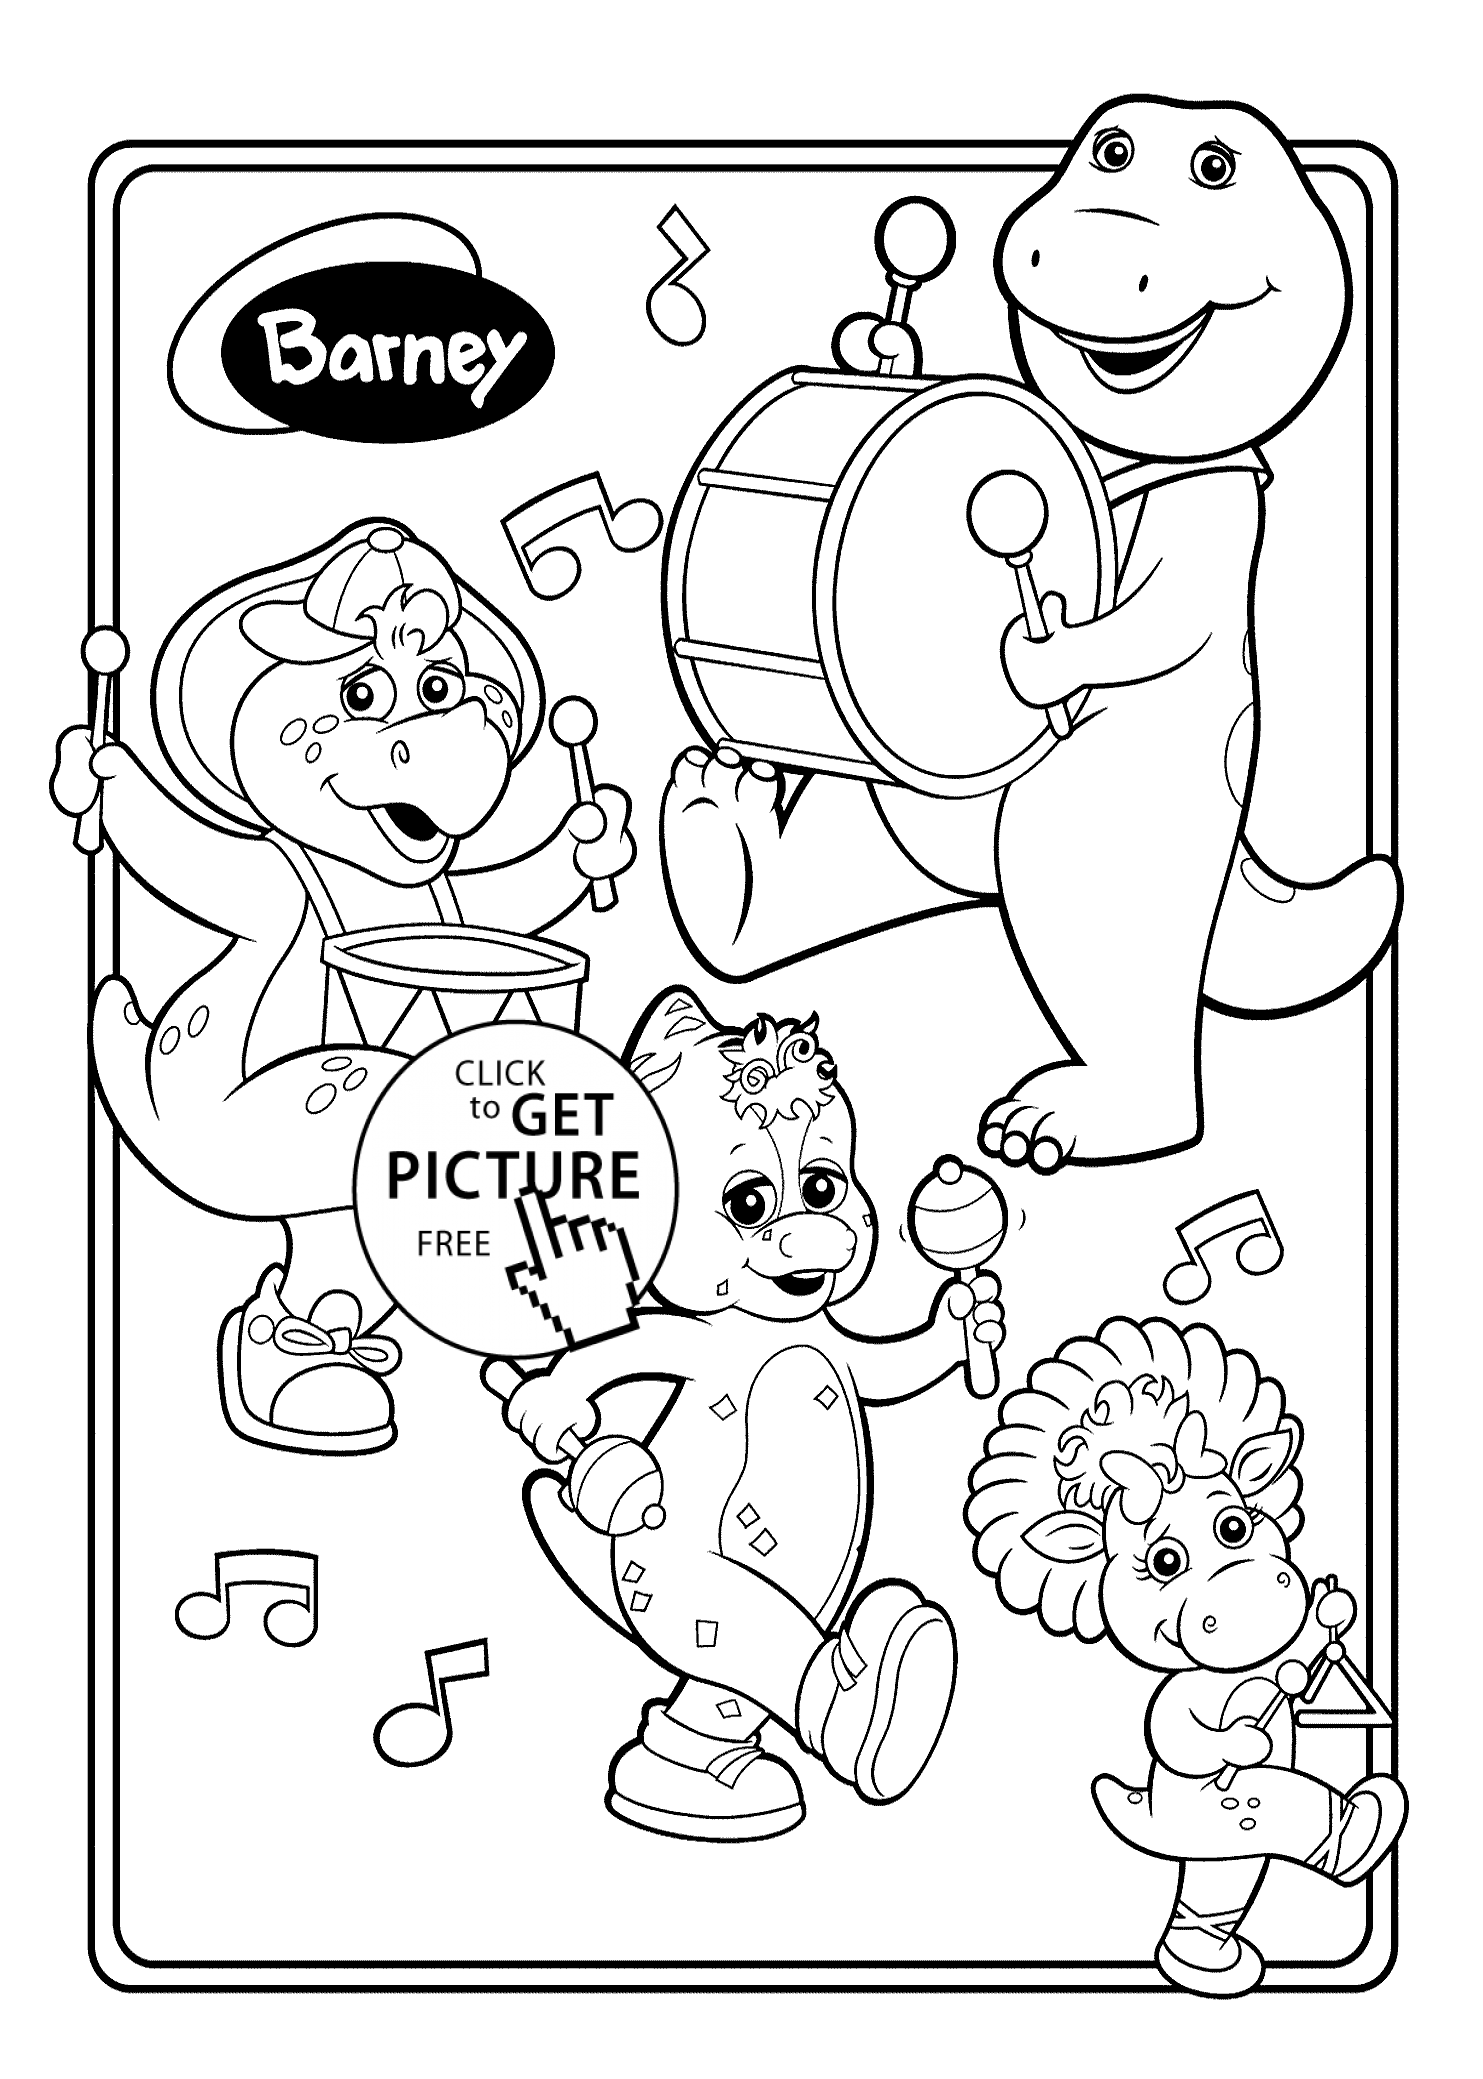 barney-birthday-coloring-pages-coloring-home